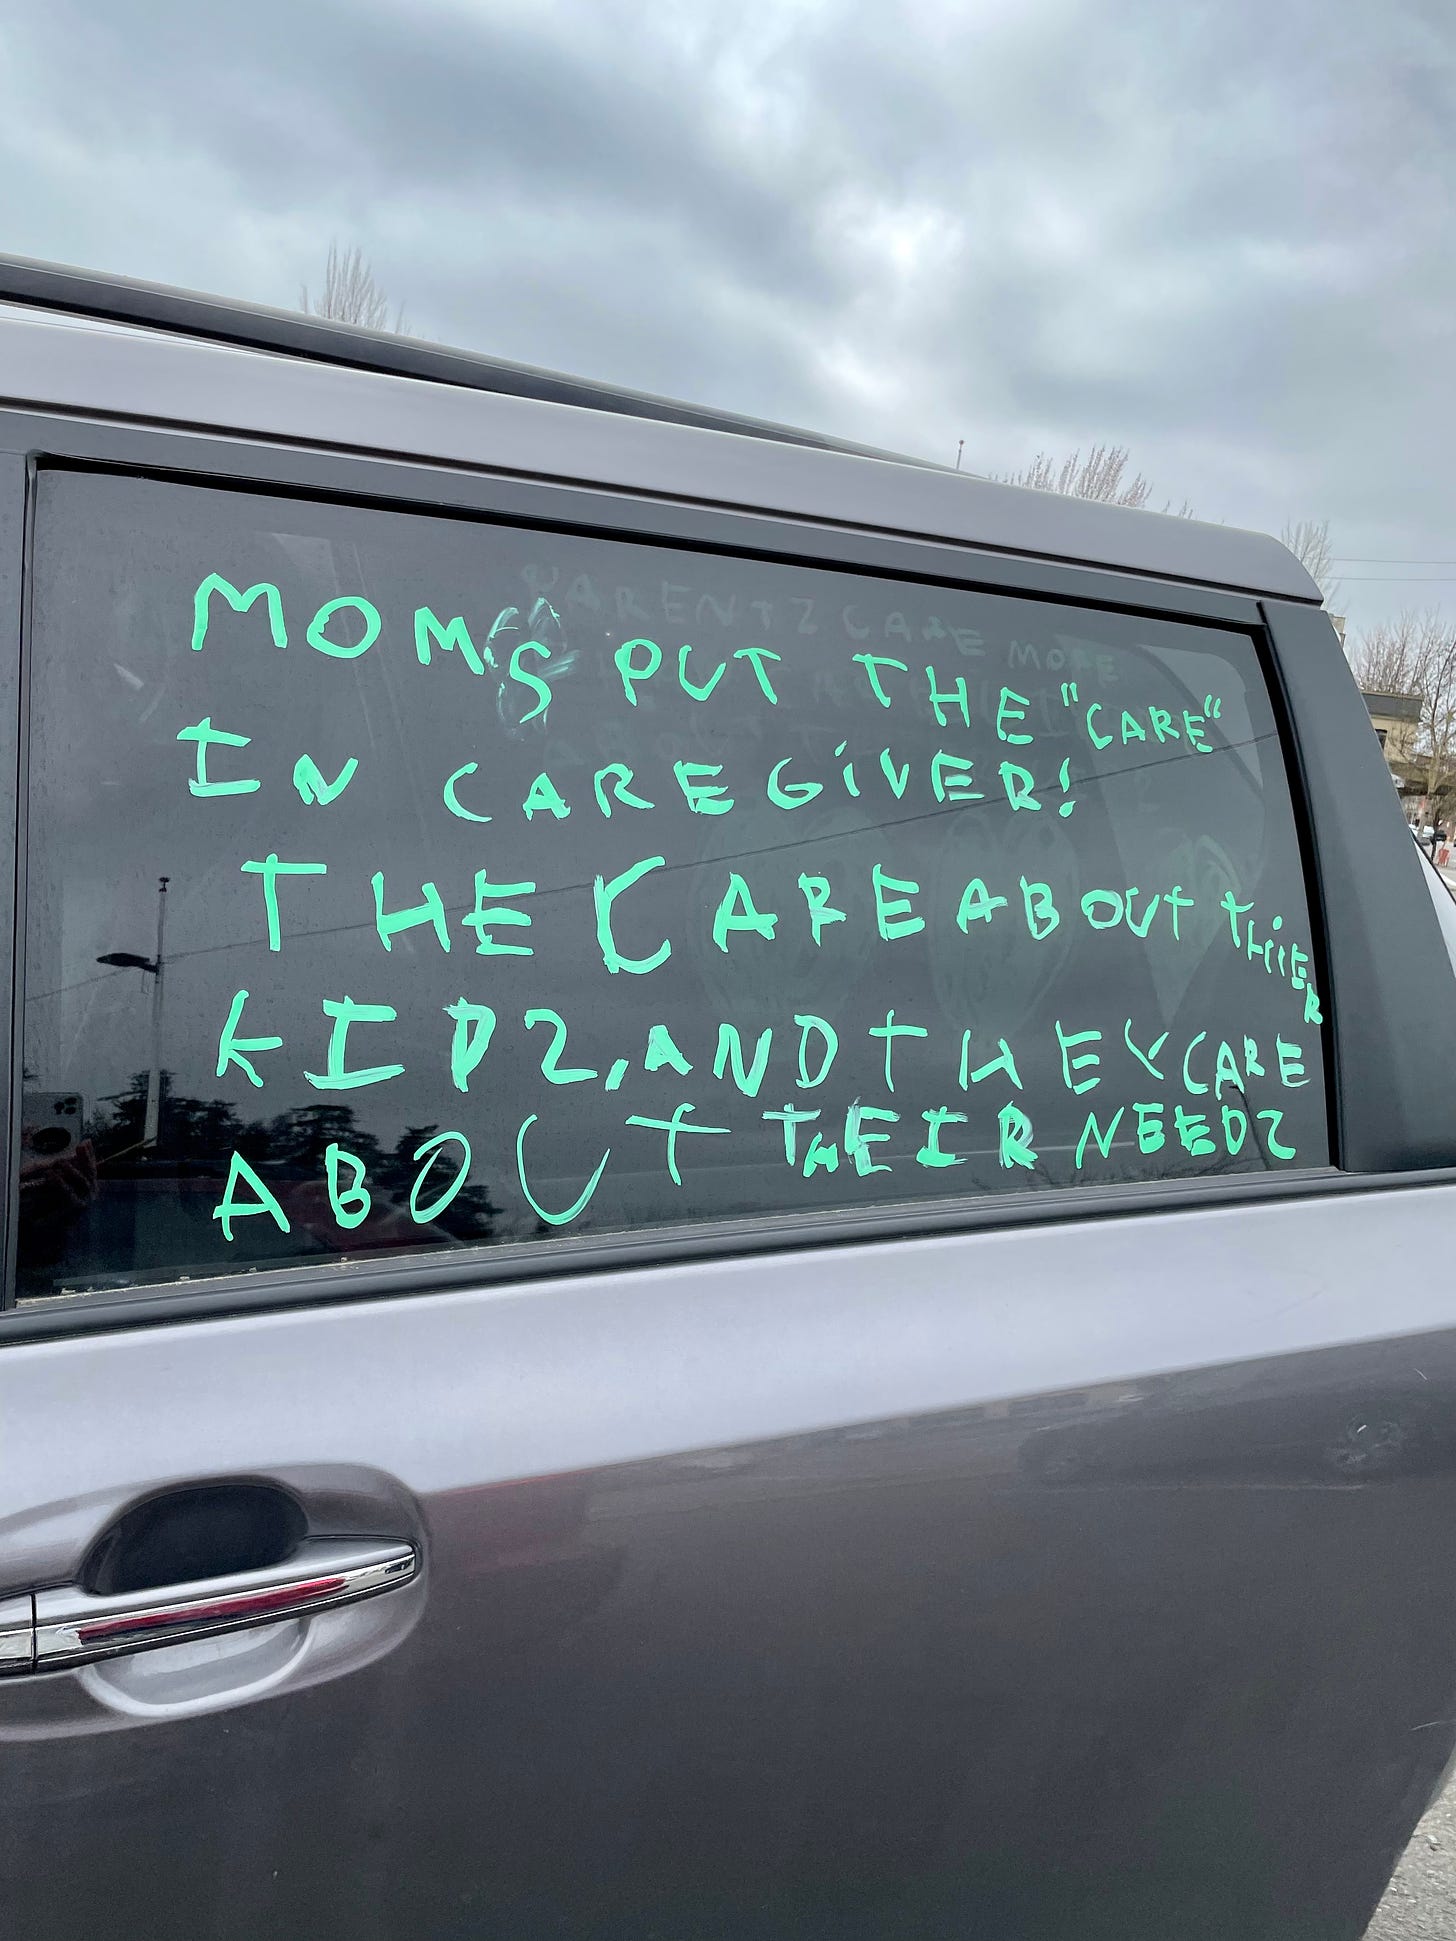 A child's writing in green marker on a minivan window reads "Moms put the 'care' in caregiver! They care about their kids and they care about their needs."